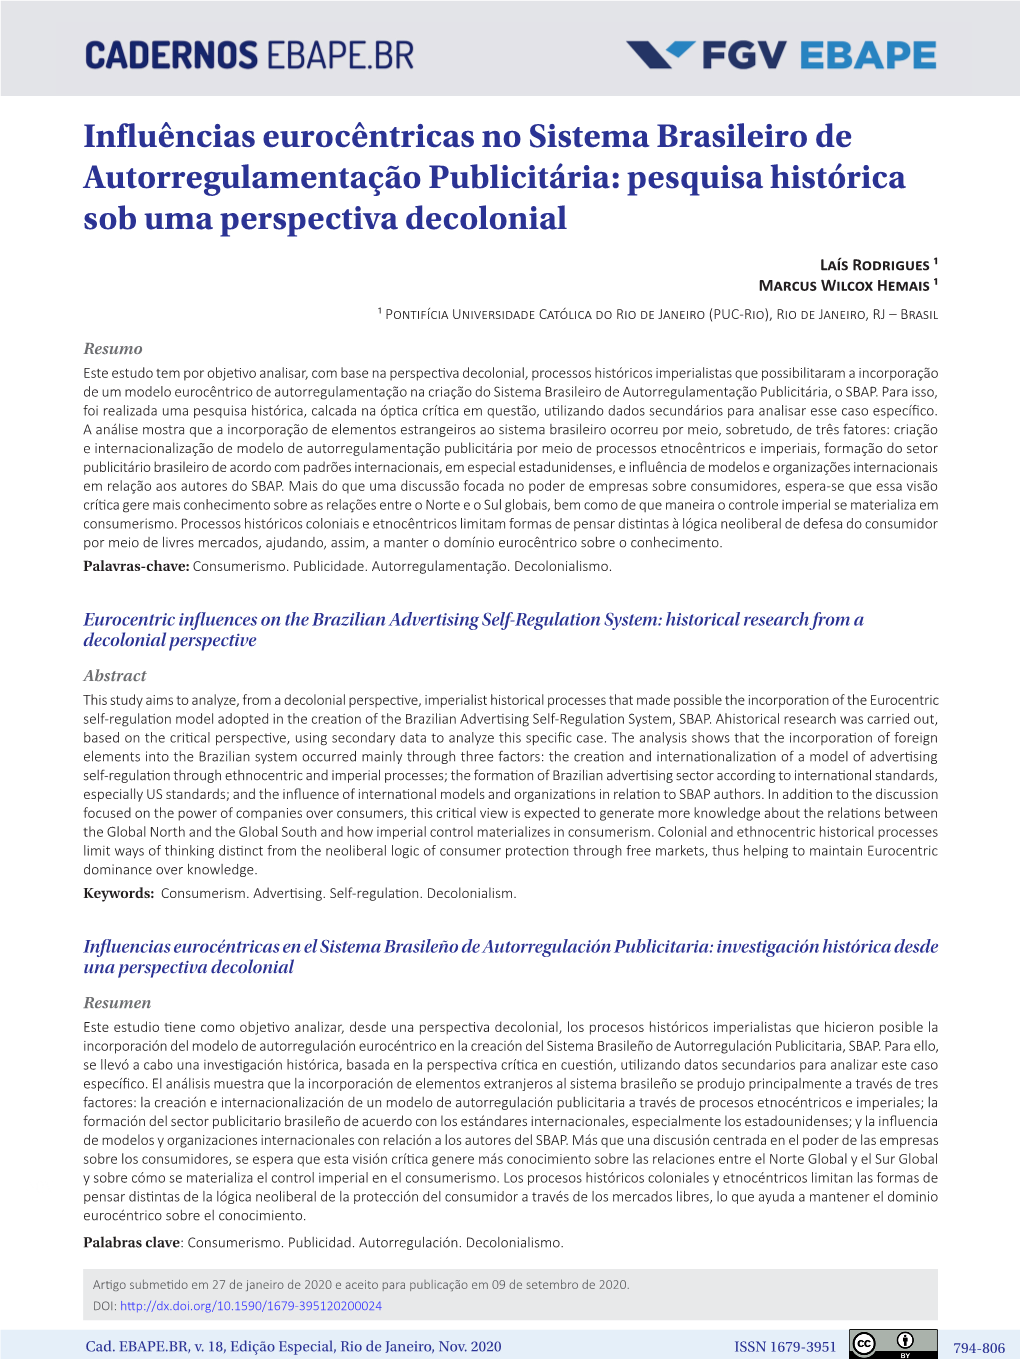 Eurocentric Influences on the Brazilian Advertising Self-Regulation System: Historical Research from a Decolonial Perspective